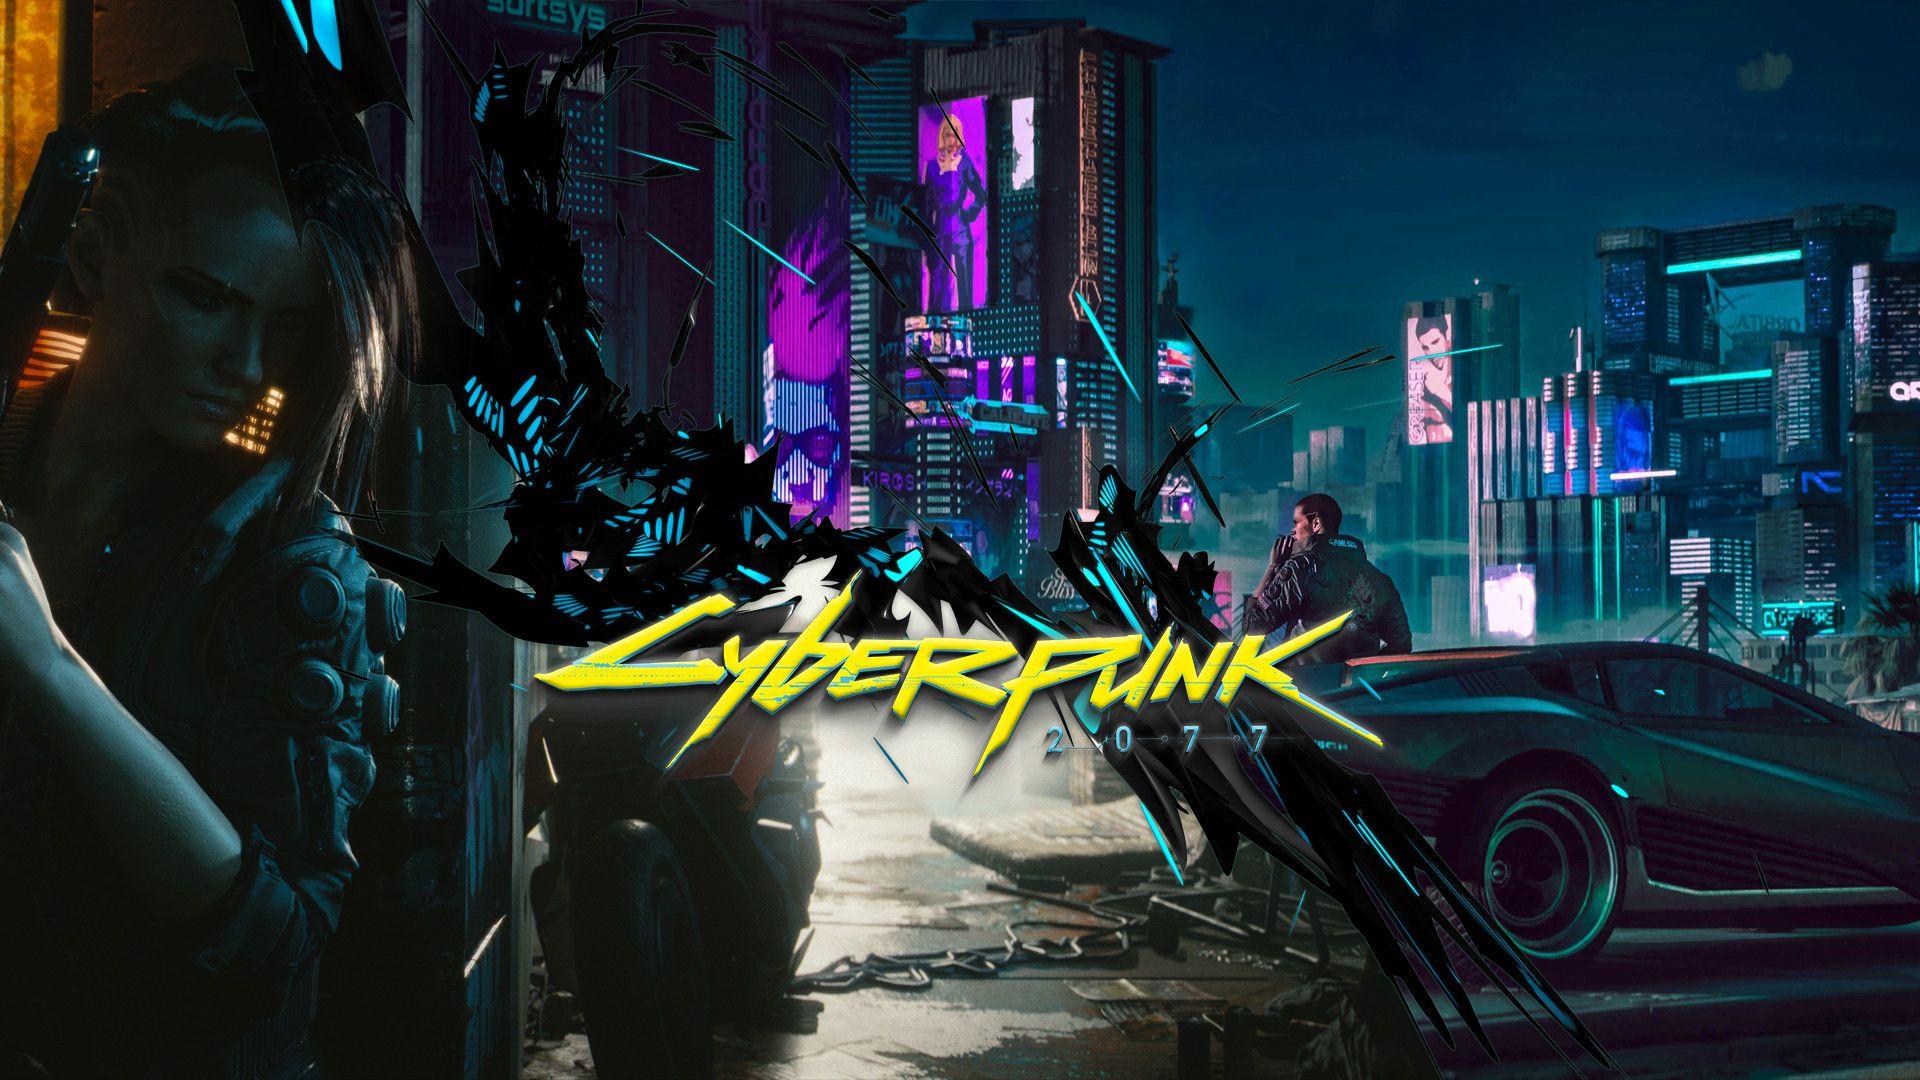 Cyberpunk 2077. What are the major things you should know? Release date, price and more